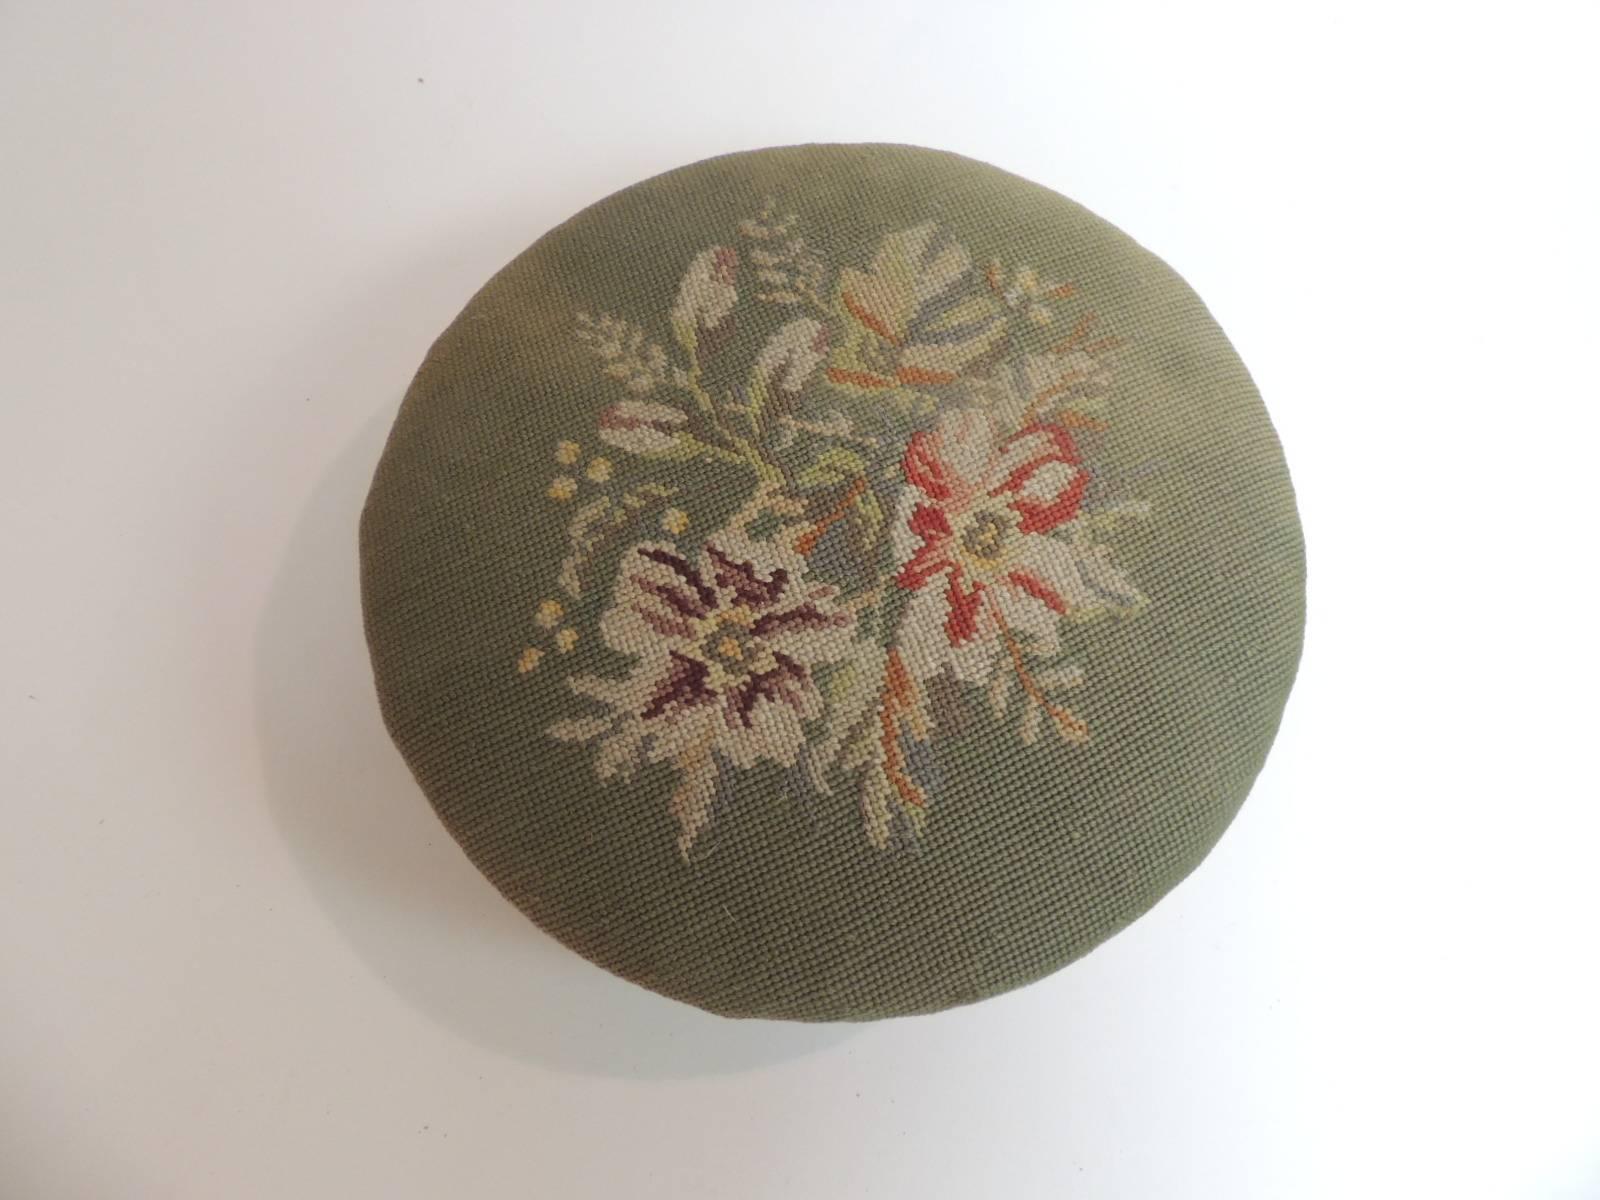 This item is part of our 7Th Anniversary SALE:
Antique Round Tapestry Upholstered Footstool
Antique Round Tapestry Upholstered Footstool. 
Green floral tapestry, wood frame and round feet.
Size: 14 x 14 x 5 H
